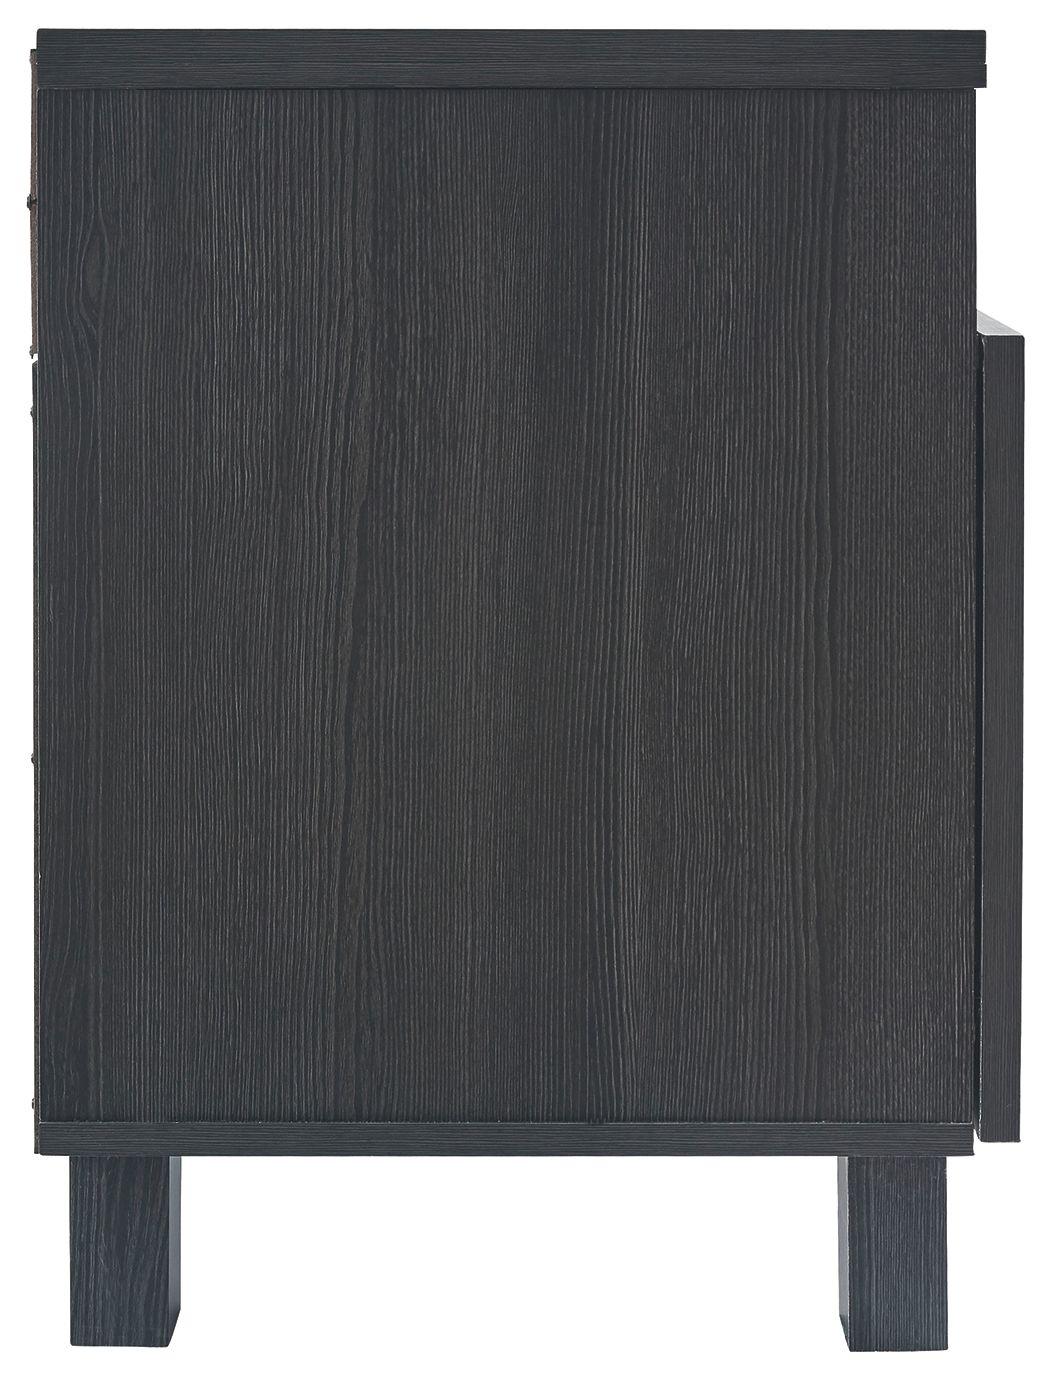 Ashley Furniture - Yarlow - Black - Extra Large TV Stand - 5th Avenue Furniture